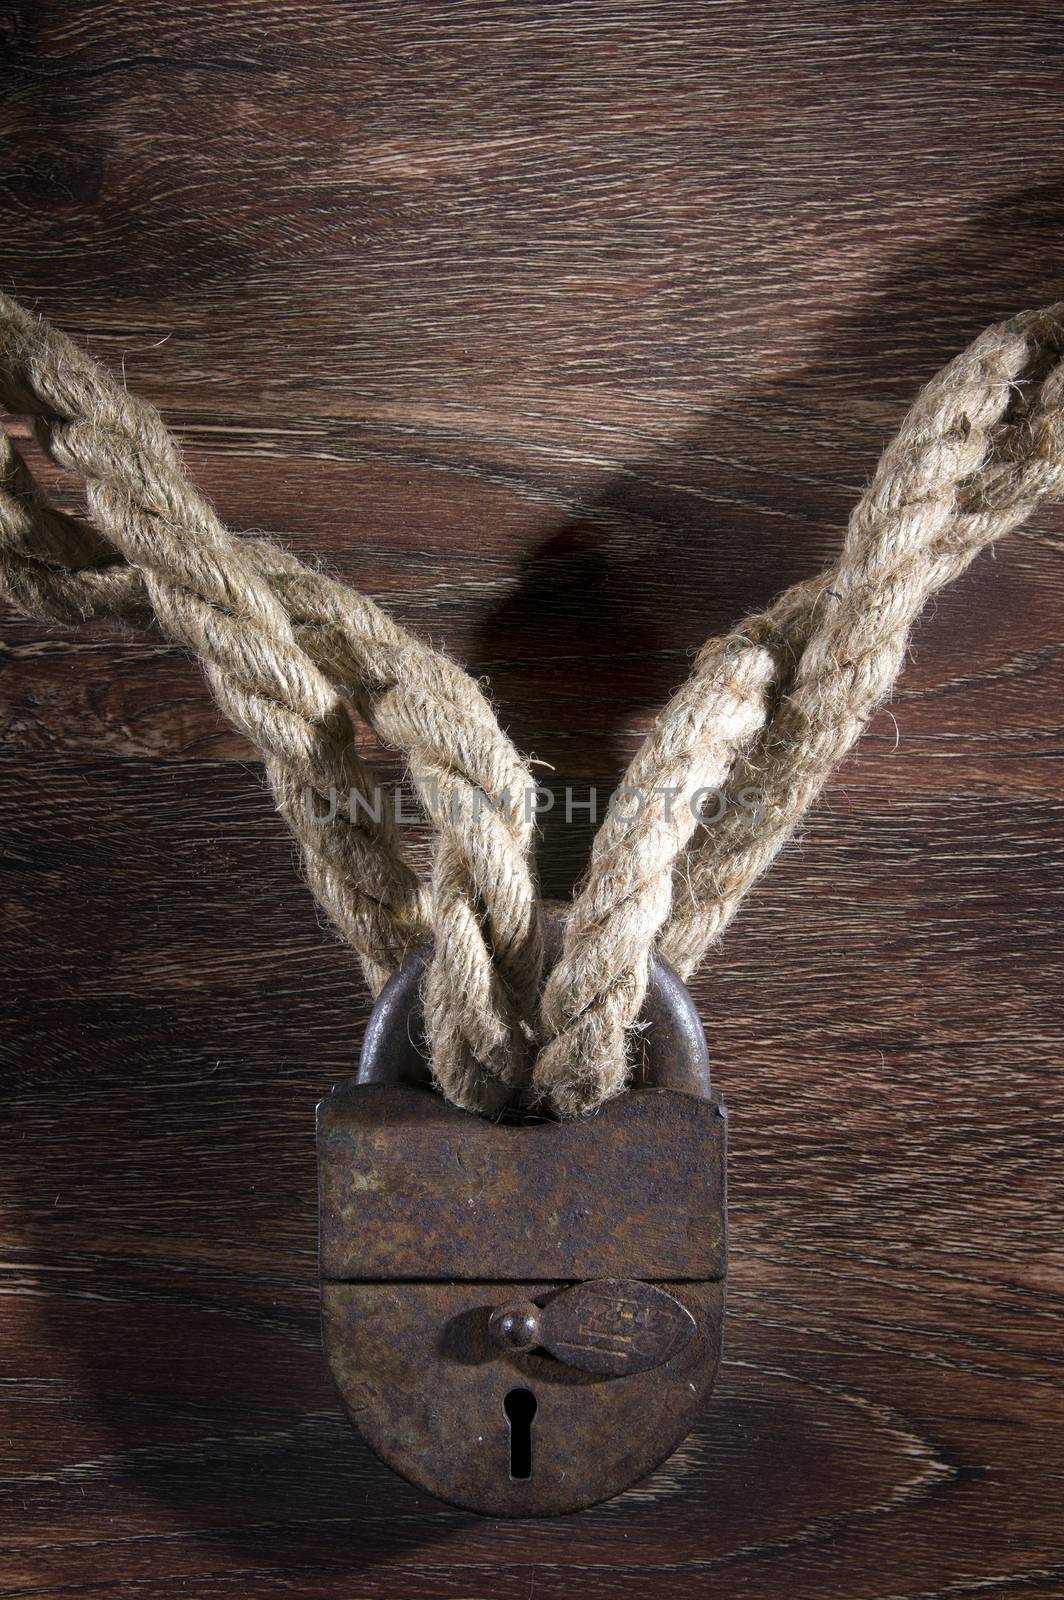 Old rusty lock with rope on wood background.